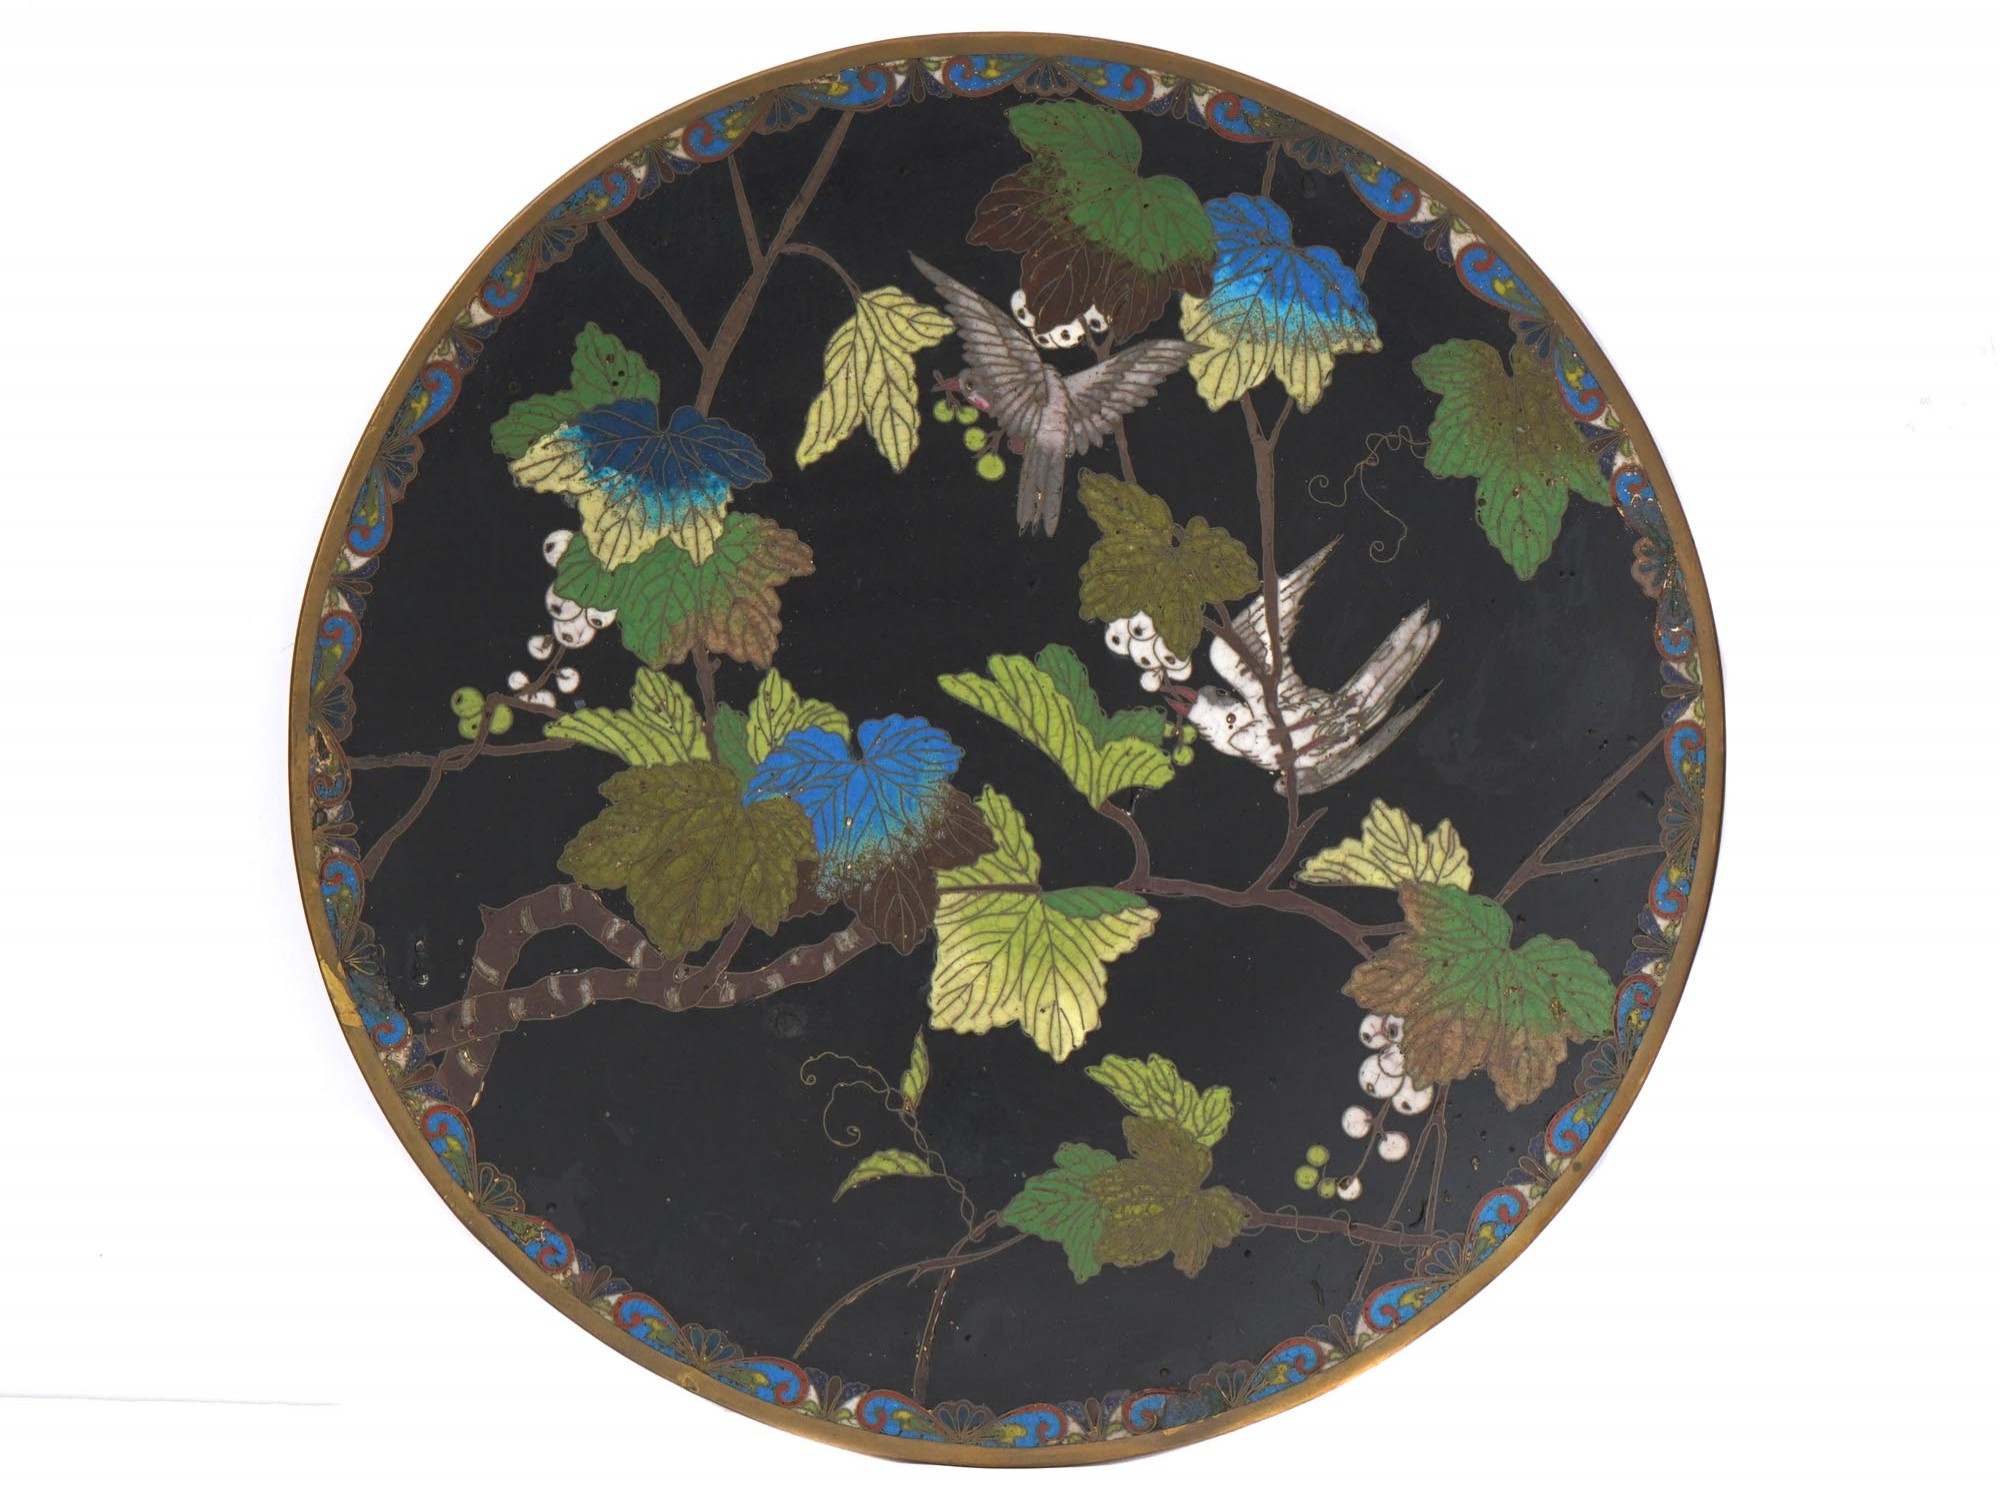 JAPANESE CLOISONNE ENAMEL OVER COPPER PLATE CHARGER PIC-0